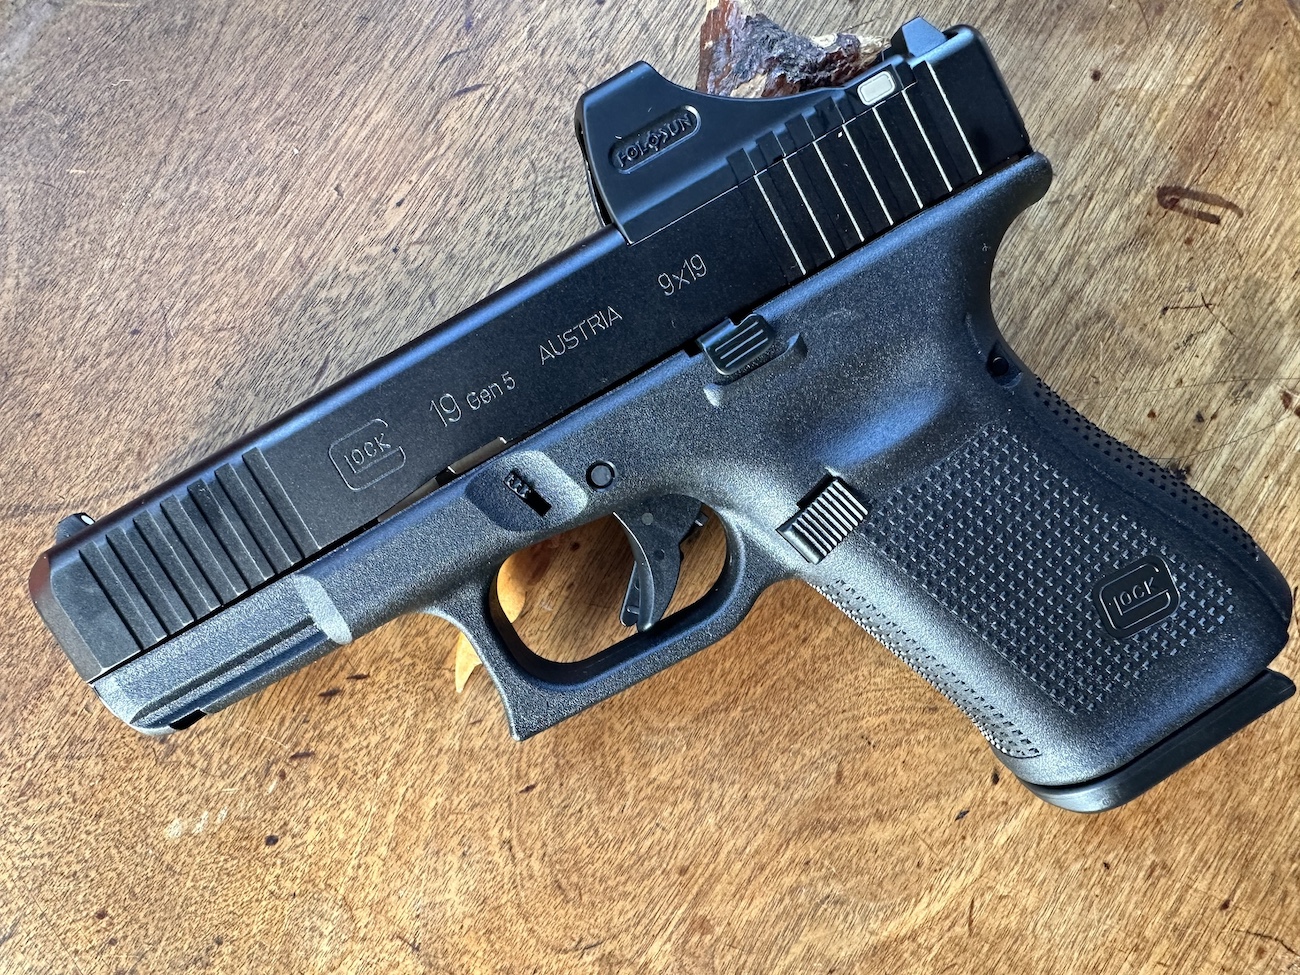 Glock 19 MOS with Holosun SCS optic PACKAGE